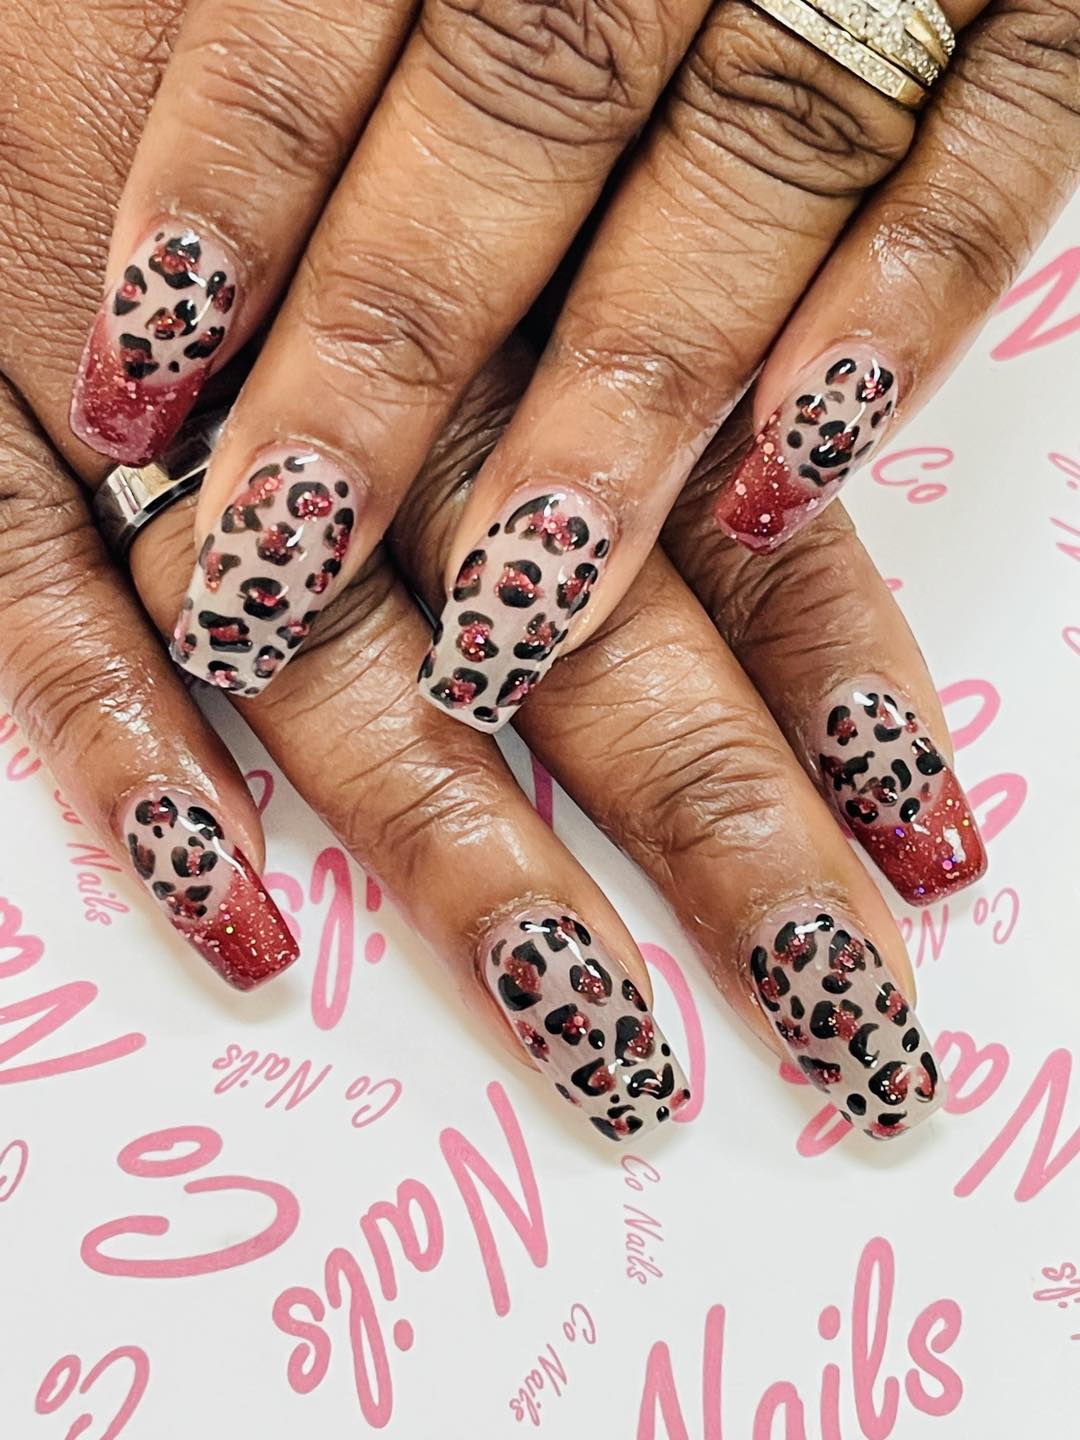 CO Nails 318 W Broaddus Ave, Bowling Green Virginia 22427